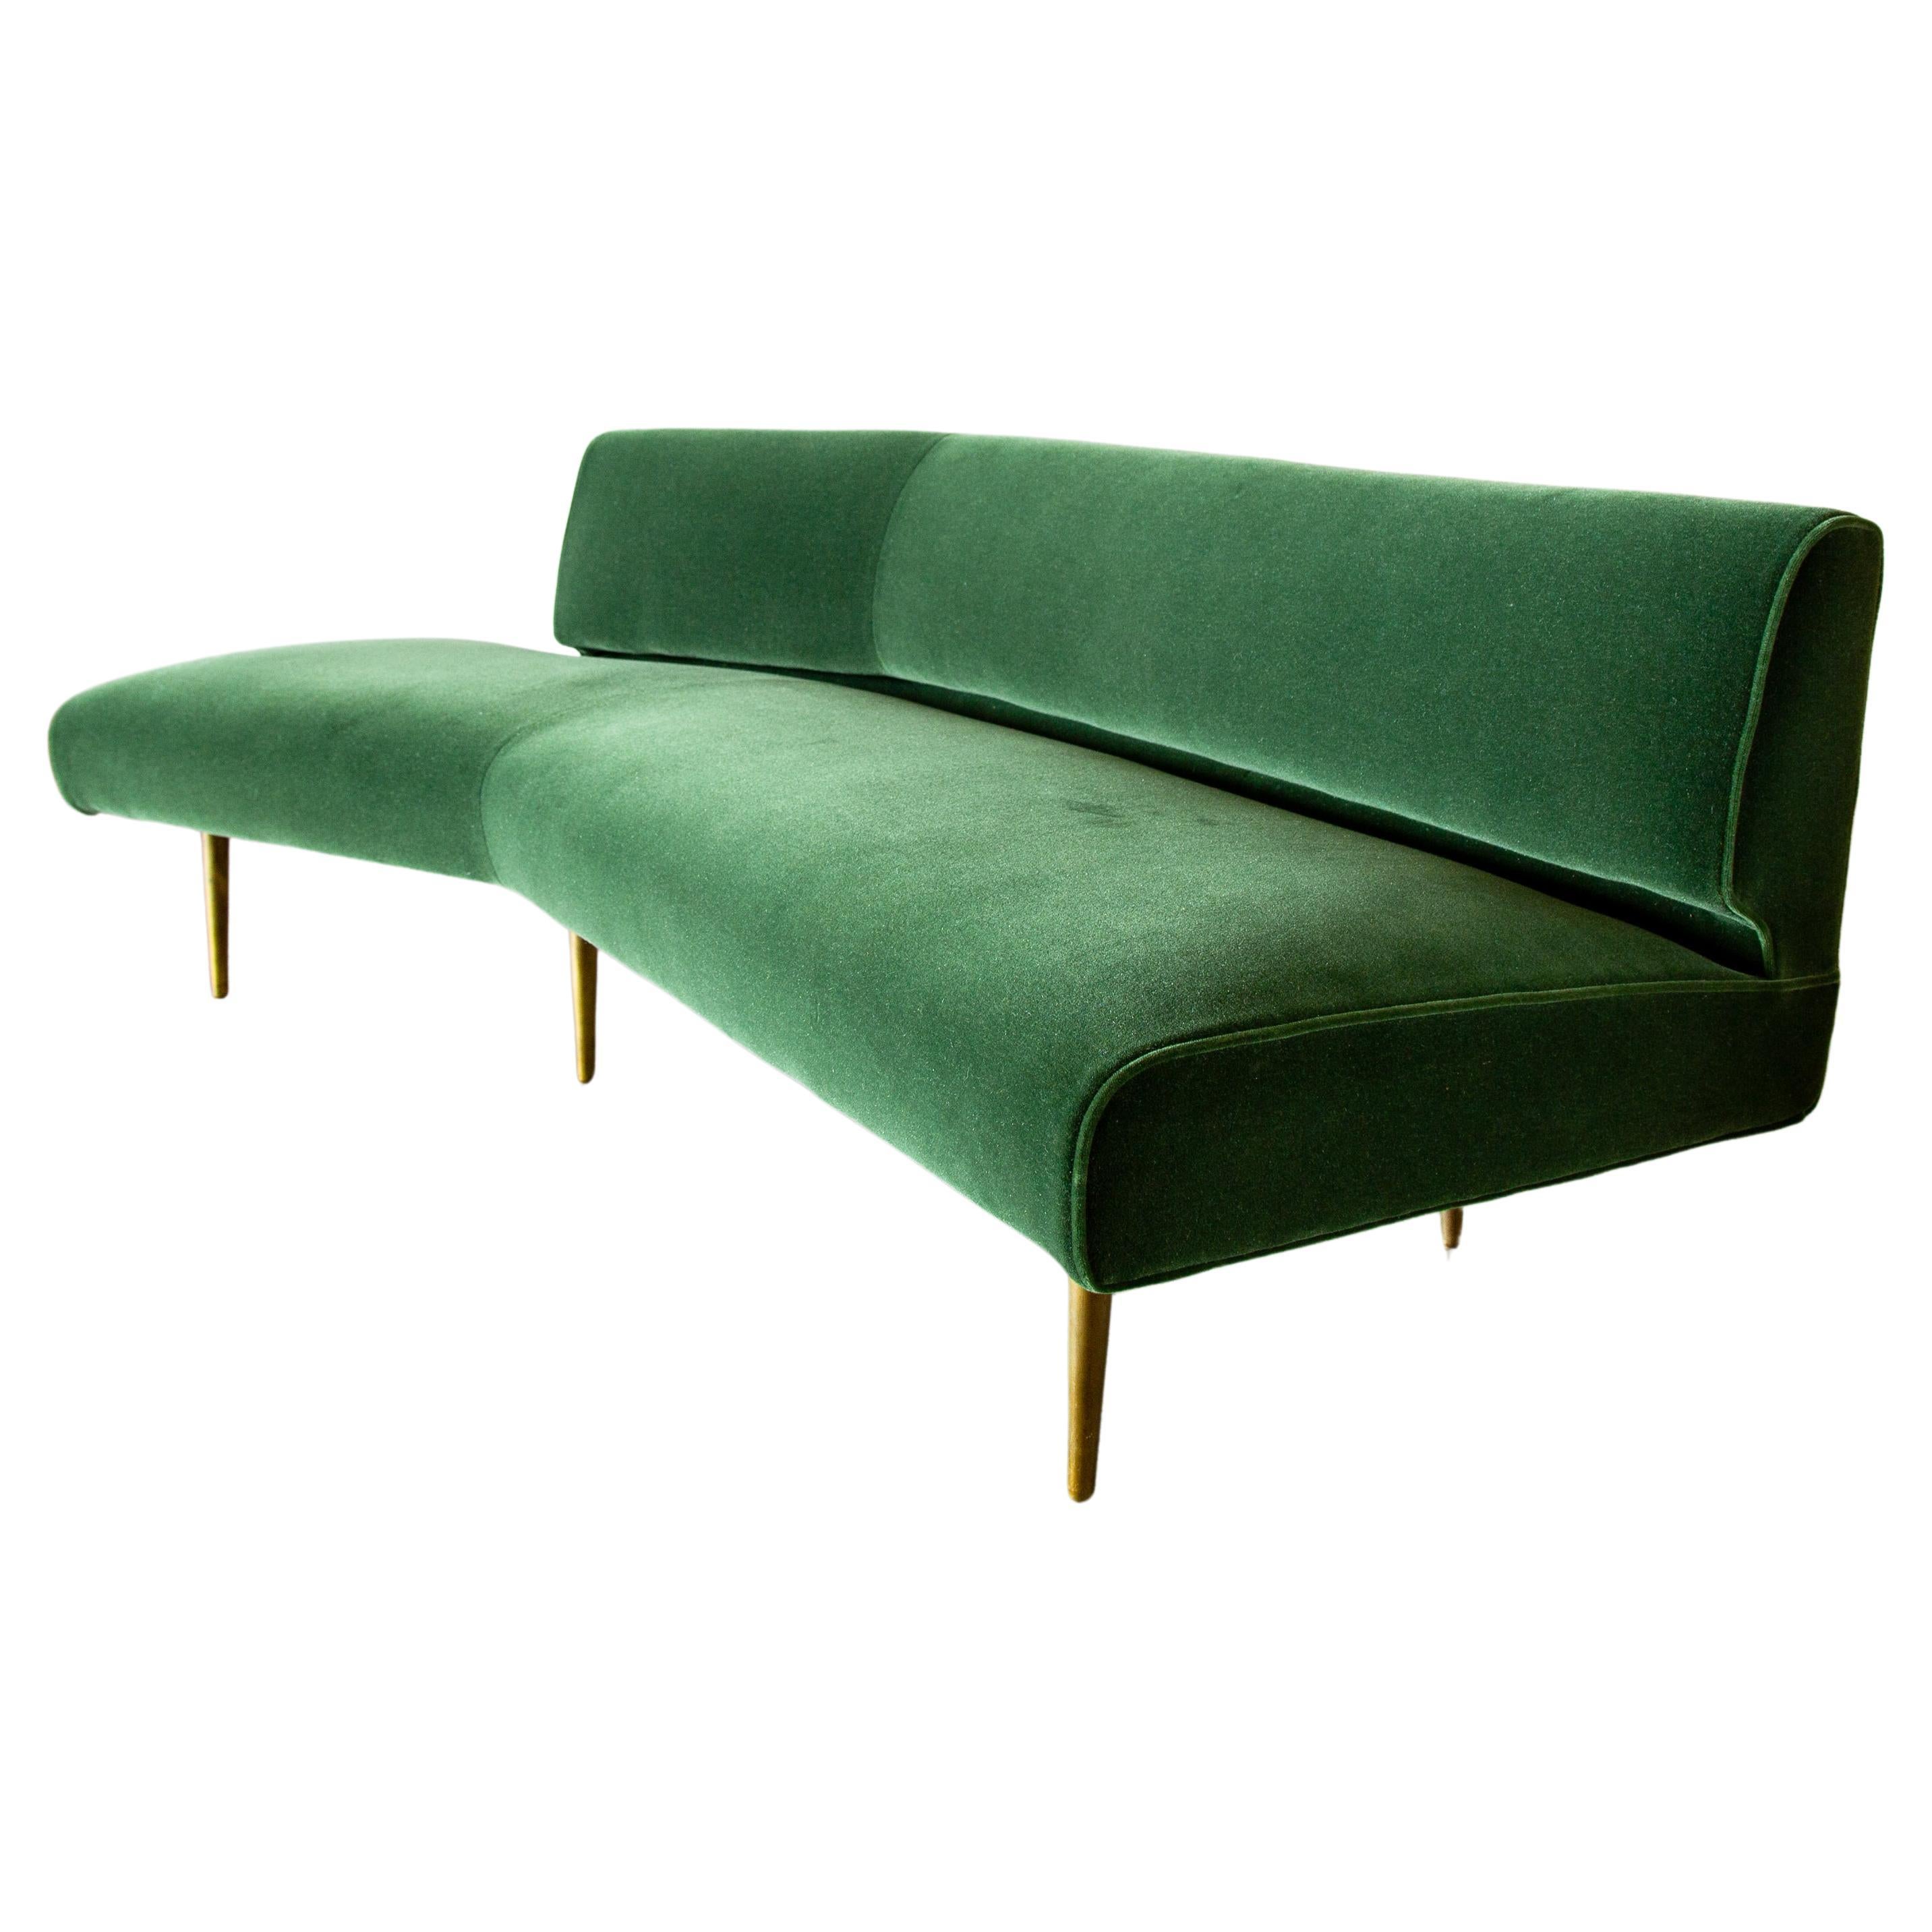 1950s Edward Wormley for Dunbar no. 4756 wing shaped sofa in Mohair and Brass For Sale